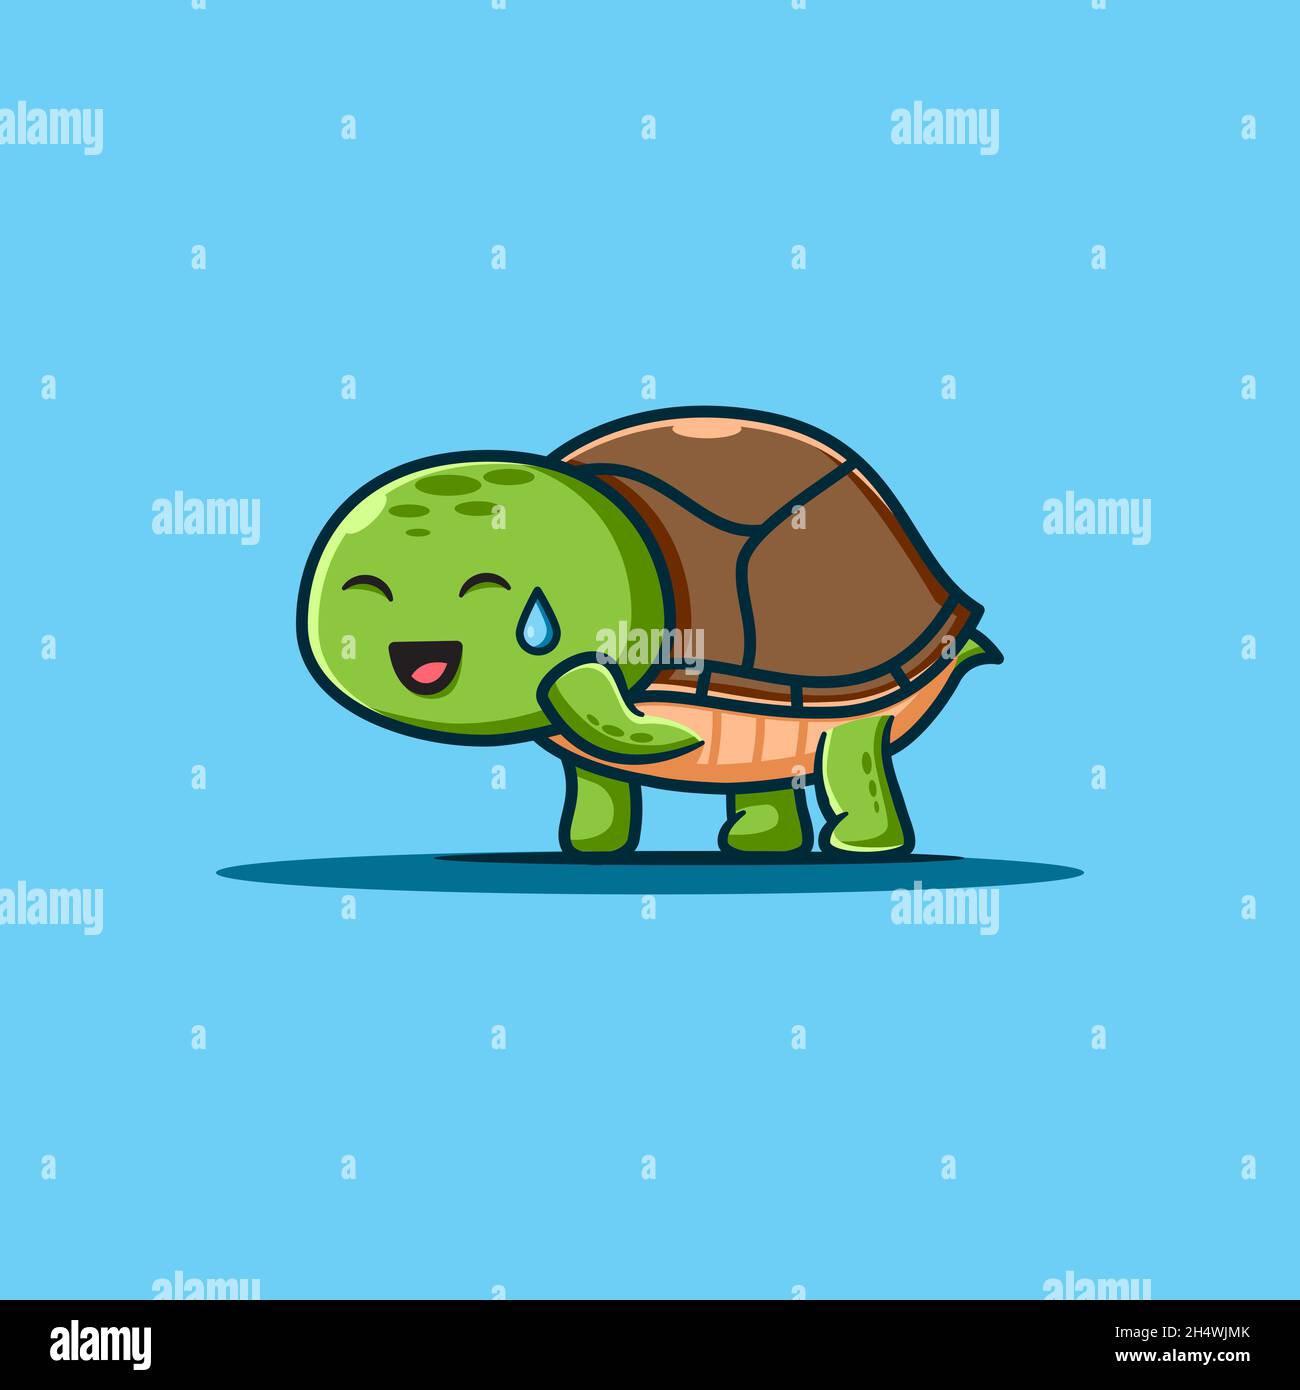 vector illustrations. cute turtle is in the position of a cute embarrassed face. cartoon and animal character style. Stock Vector